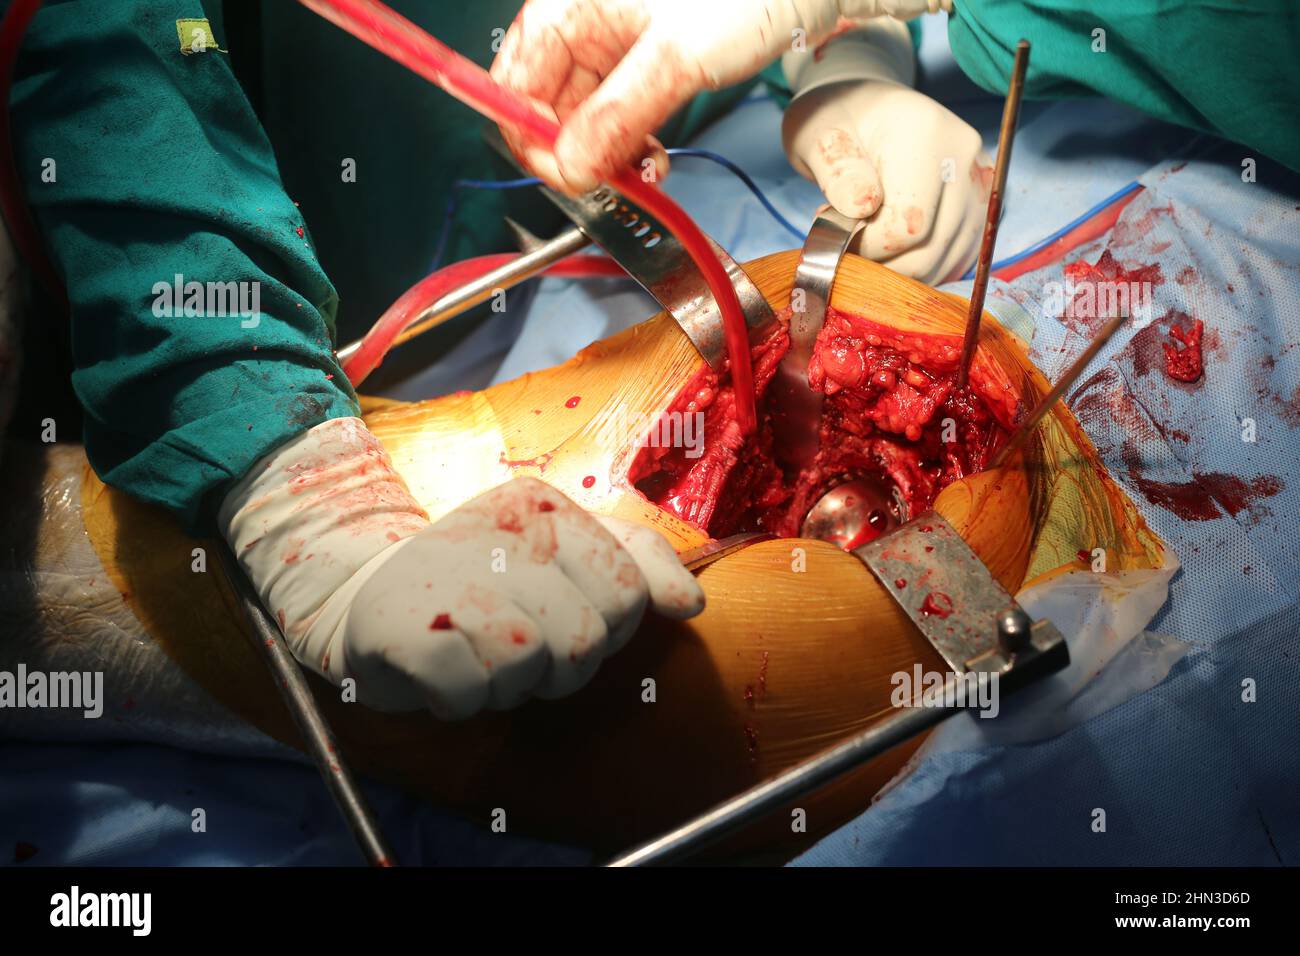 Knee replacement surgery in Operation theatre Stock Photo